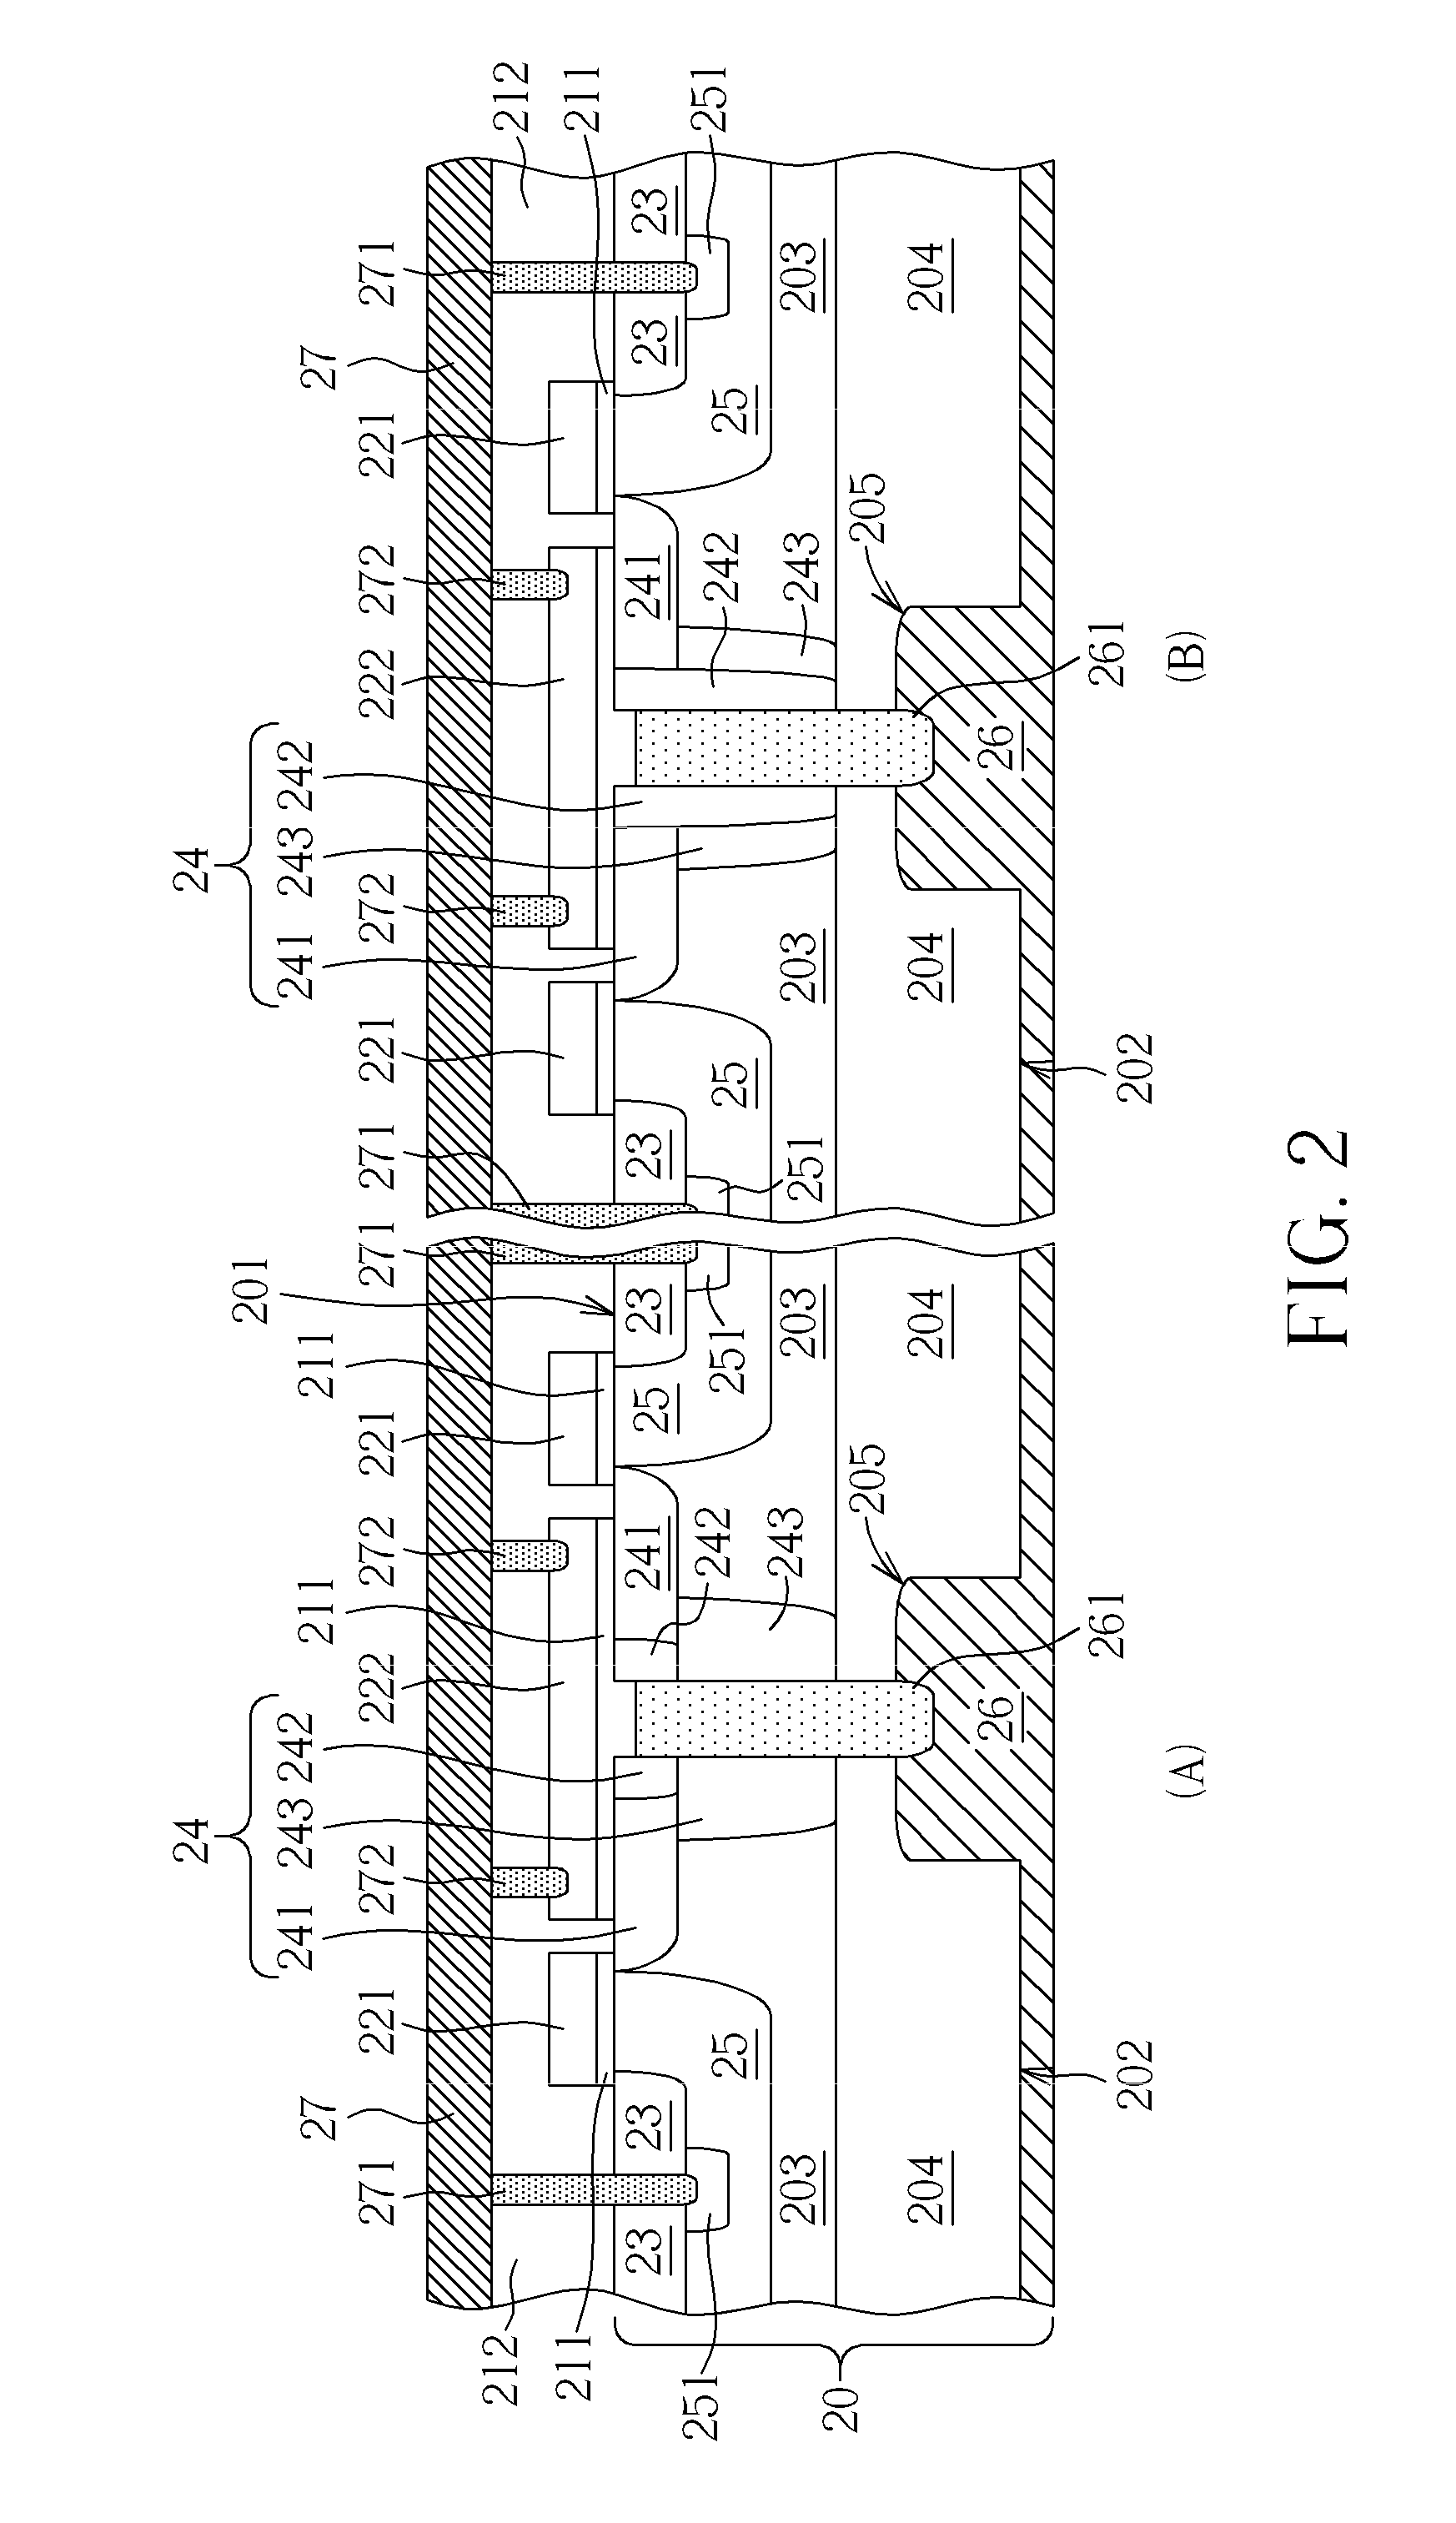 Laterally diffused metal-oxide-semiconductor device